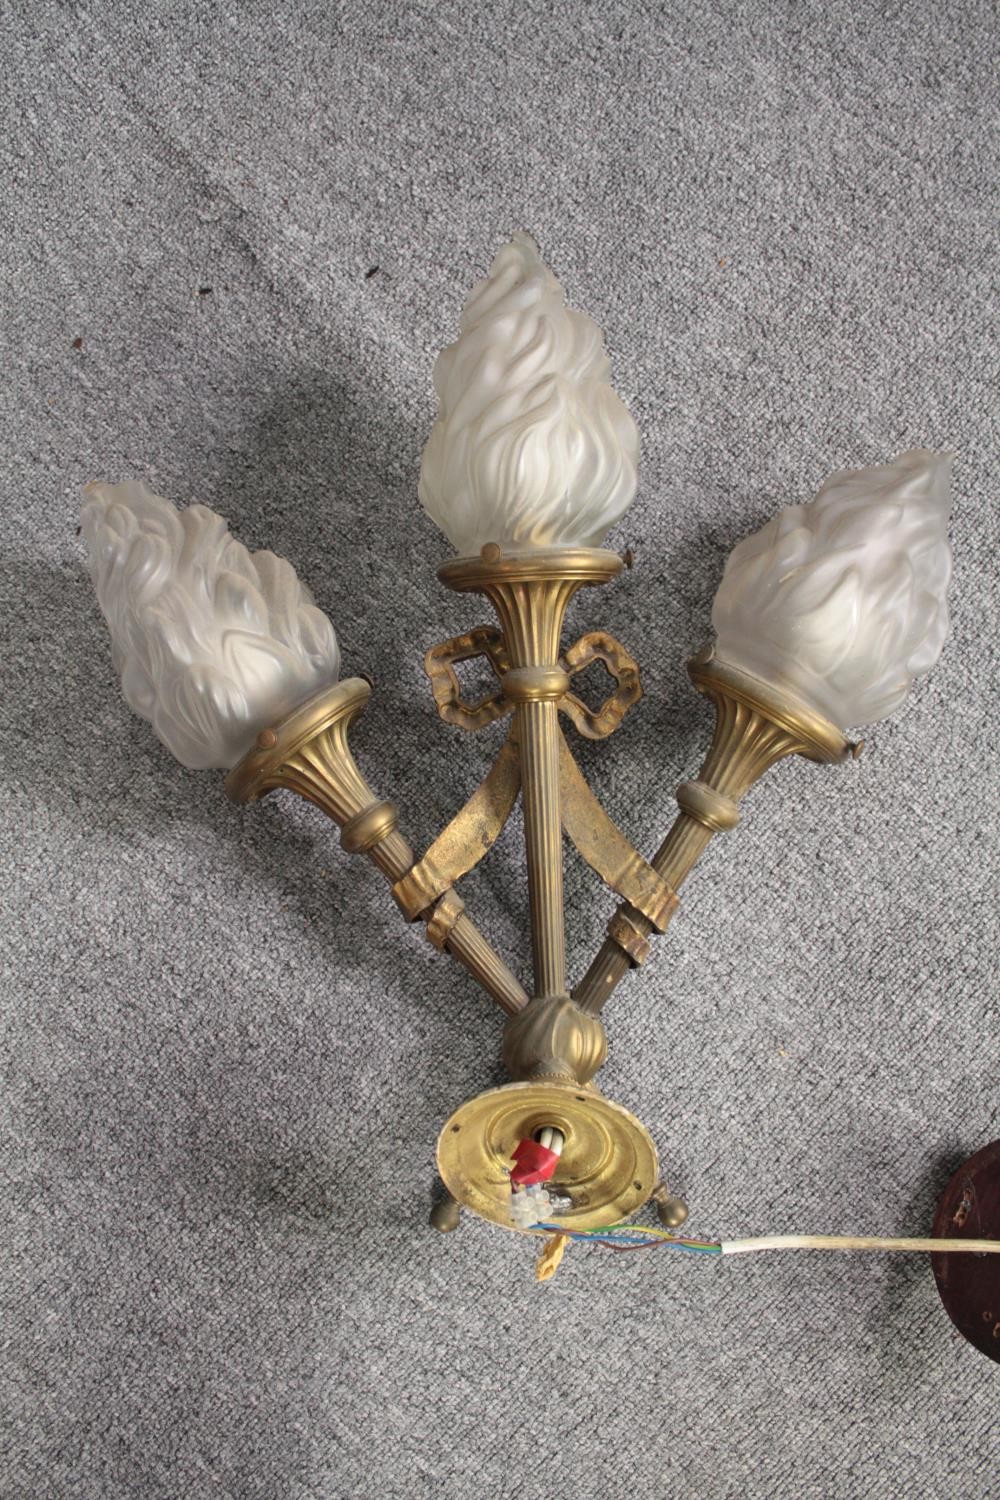 Wall light in the form of three torches. H.55 W.50cm. - Image 5 of 5